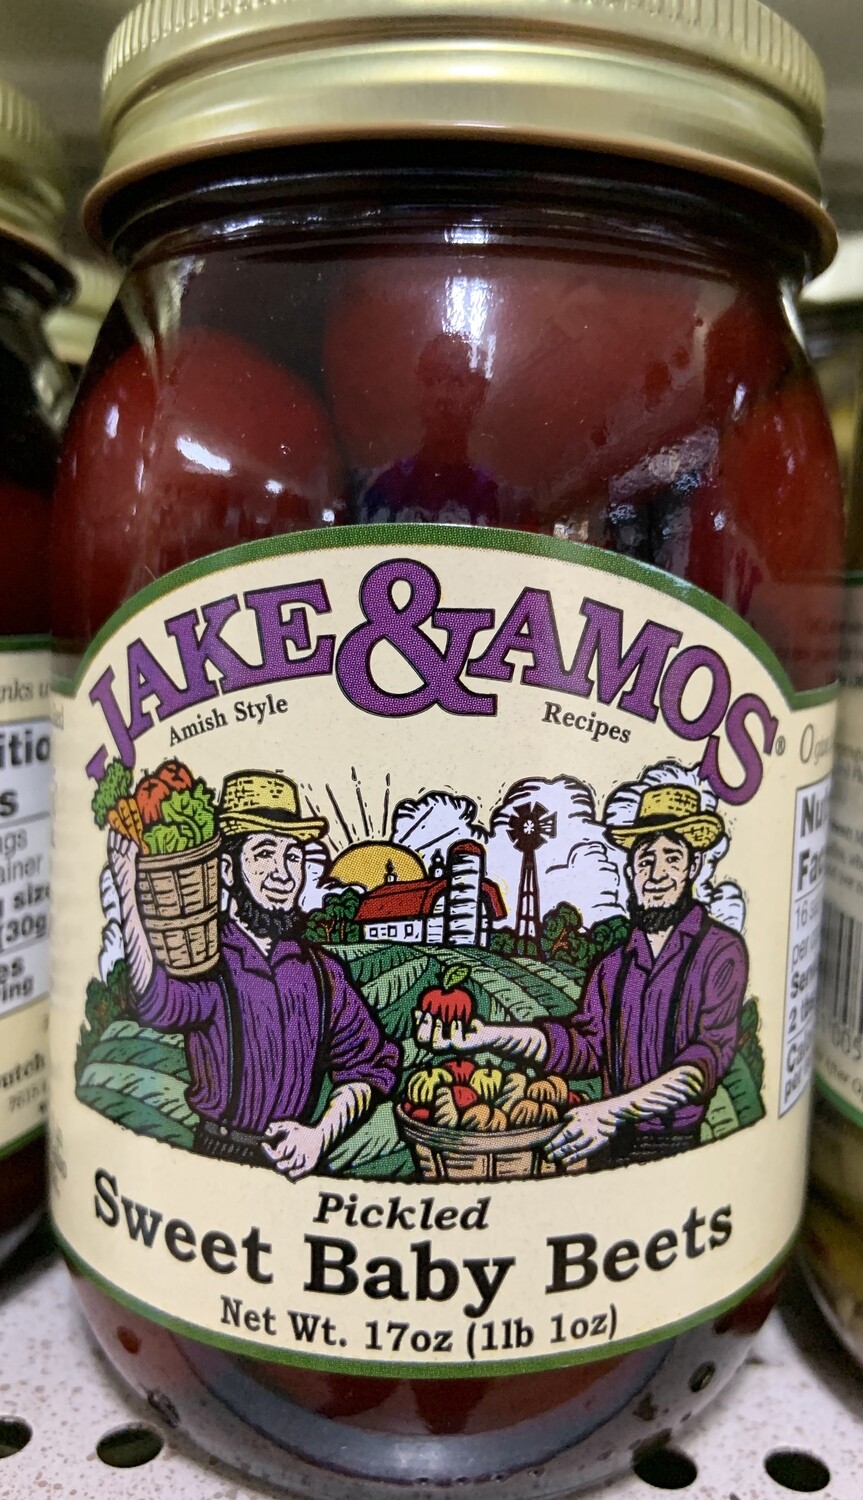 Jake and Amos Pickled Sweet Baby Beets 16 oz